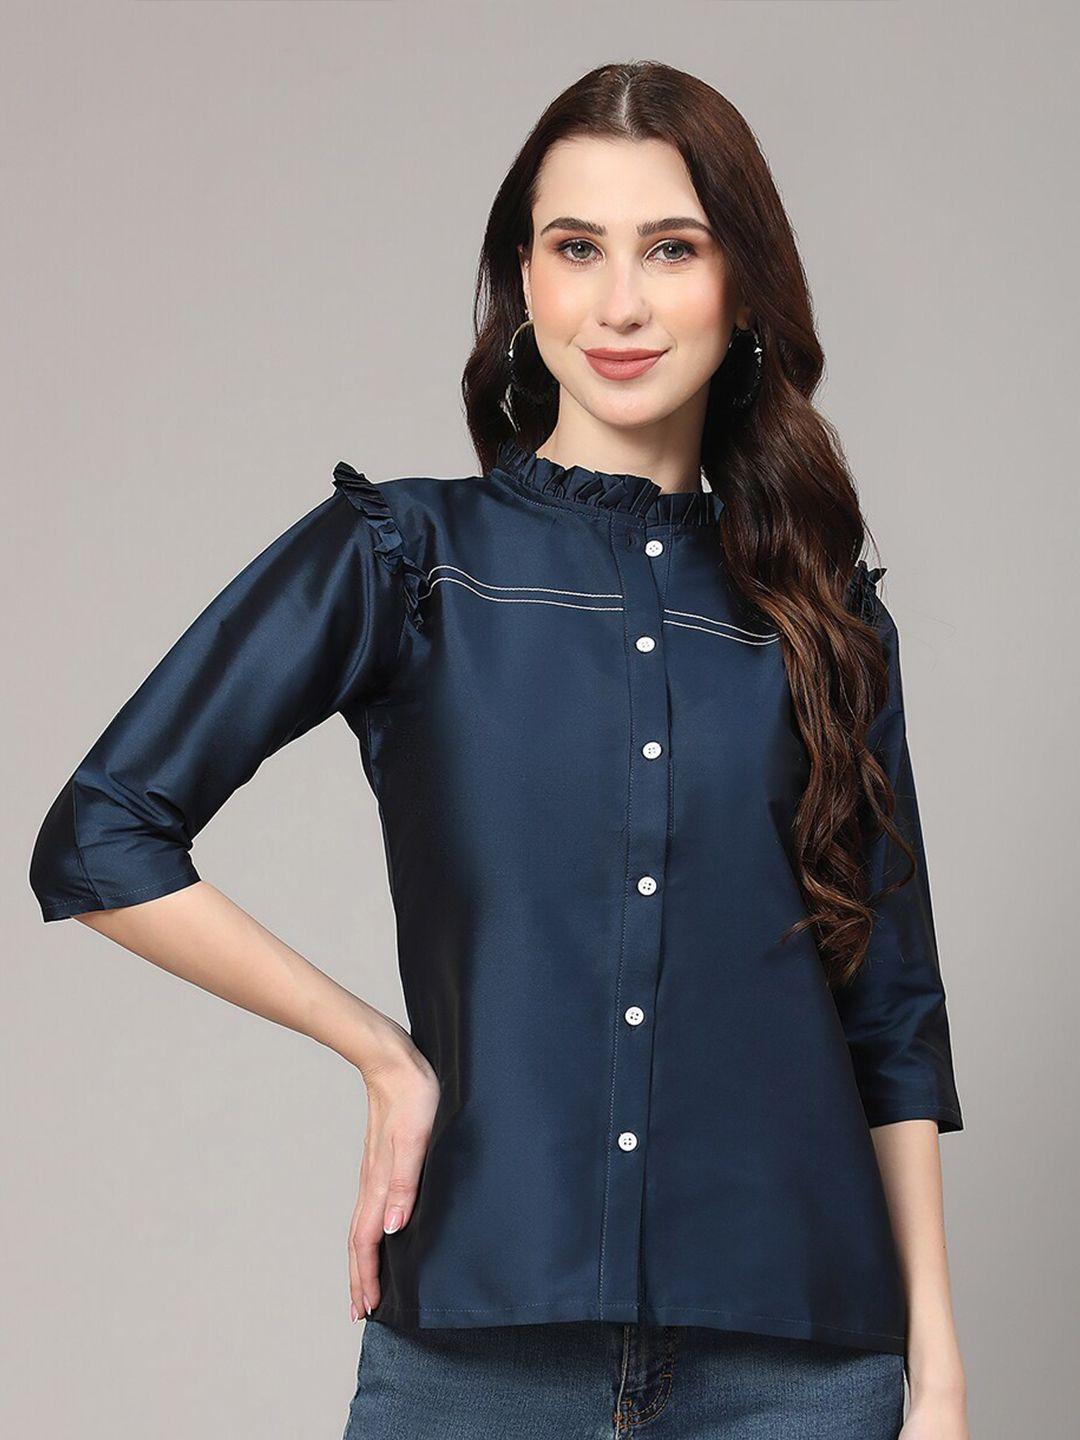 v tradition high neck ruffled shirt style top